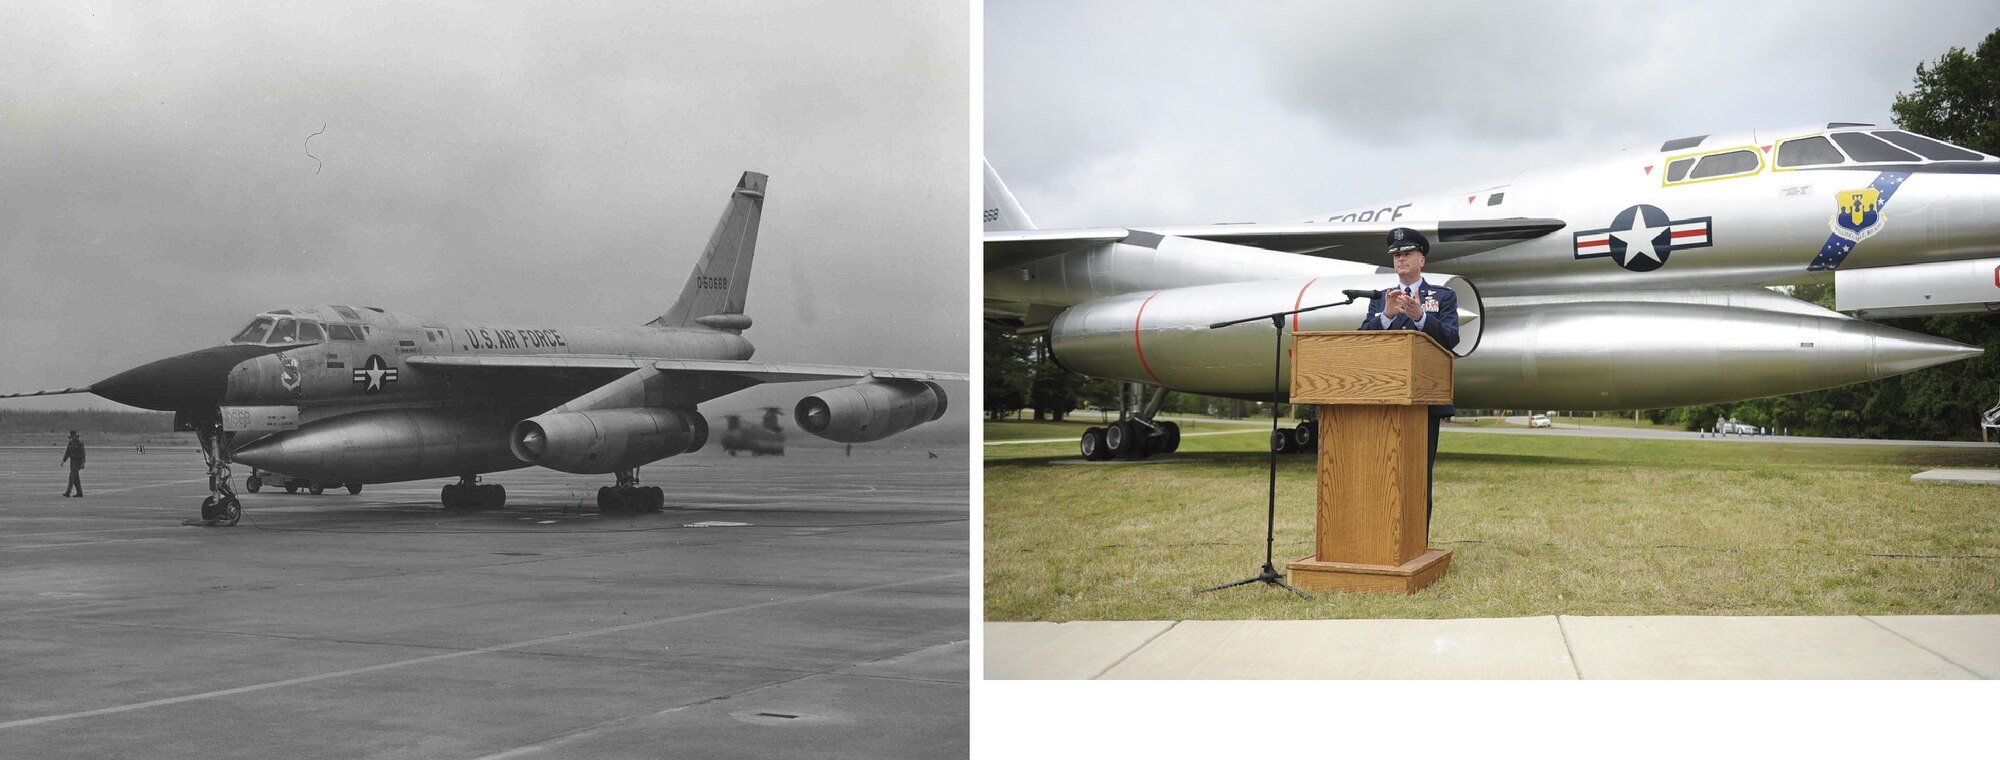 (left) On Jan. 16, 1970, the Strategic Air Command retired its last B-58 Hustler. Two bombers from the 43rd Bombardment Wing at Little Rock Air Force Base, Arkansas, and two from the 305th Bombardment Wing at Grissom AFB, Indiana, flew to the aircraft storage facility at Davis-Monthan AFB, Arizona. 

(right) Forty-three years after the last B-58 left Little Rock AFB, Col. Tom Crimmins, a former 19th Airlift Wing vice commander, dedicated B-58 with tail number 55-0668 May 3, 2013, as the newest addition to Heritage Park. The B-58, also known by its nicknames "Wild Child II" and "Peeping Tom," is the only
combat-veteran Hustler having made an overflight of Cuba during the Cuban Missile Crisis in 1962. 
